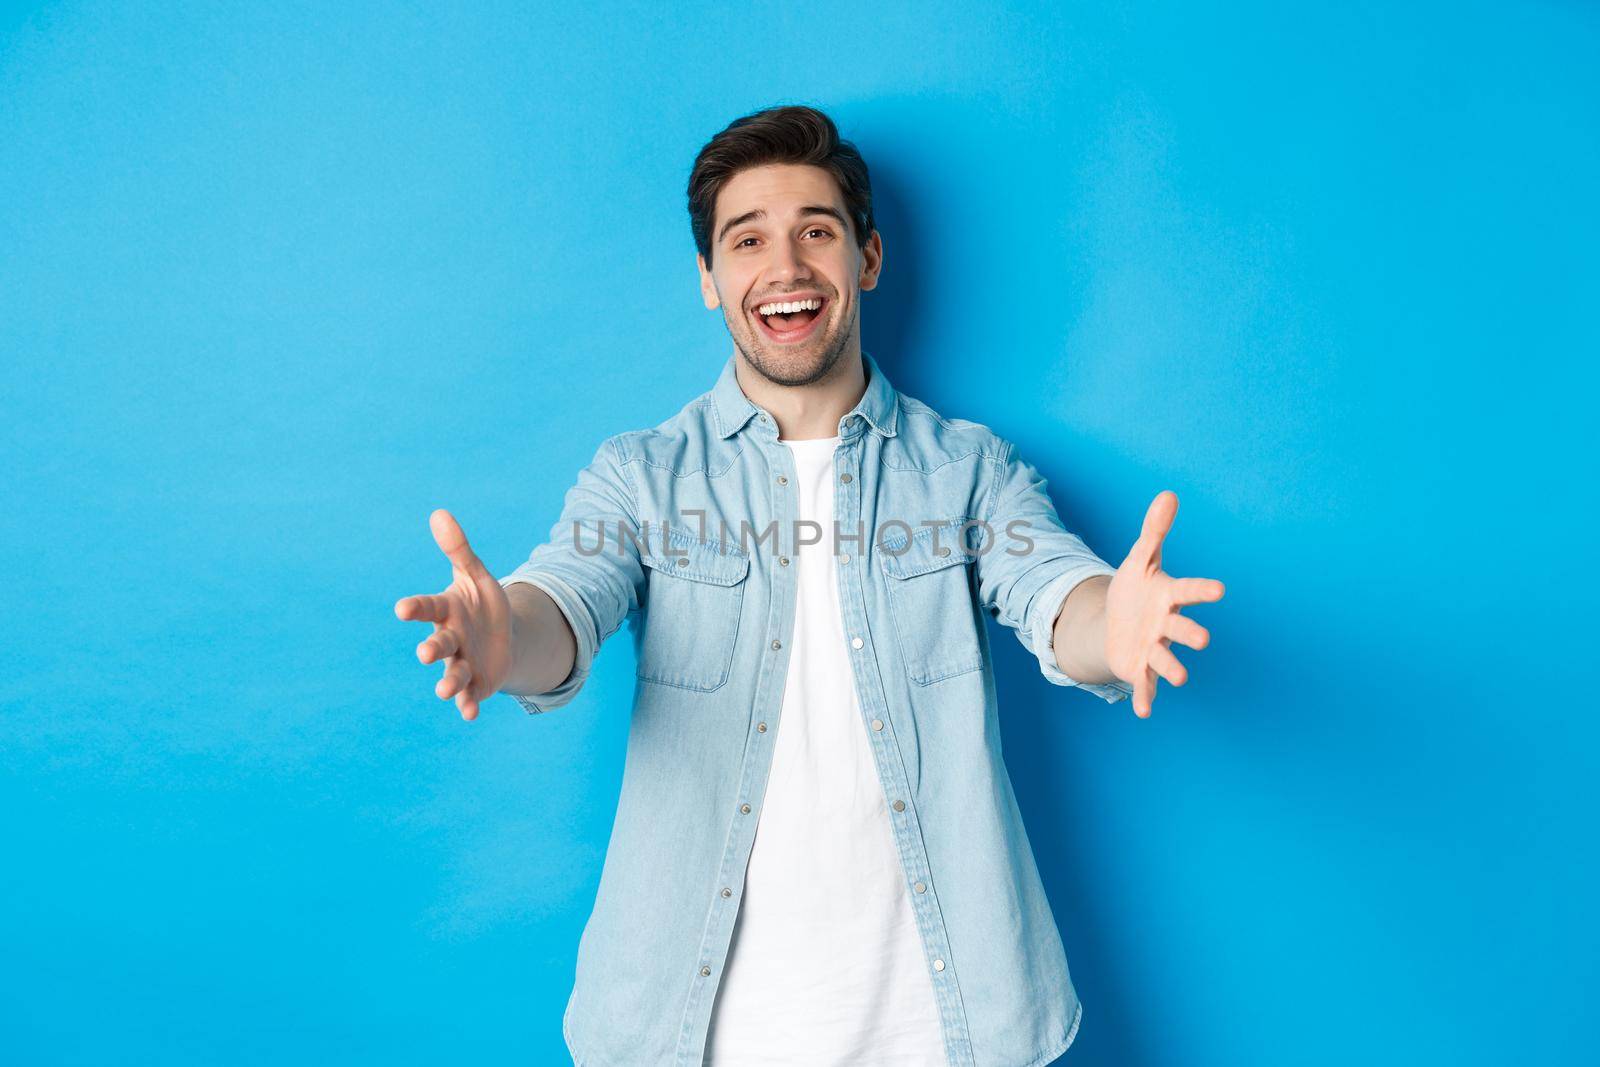 Friendly man stretching hands forward and welcome you, greeting guests or reaching for hugs, standing against blue background.